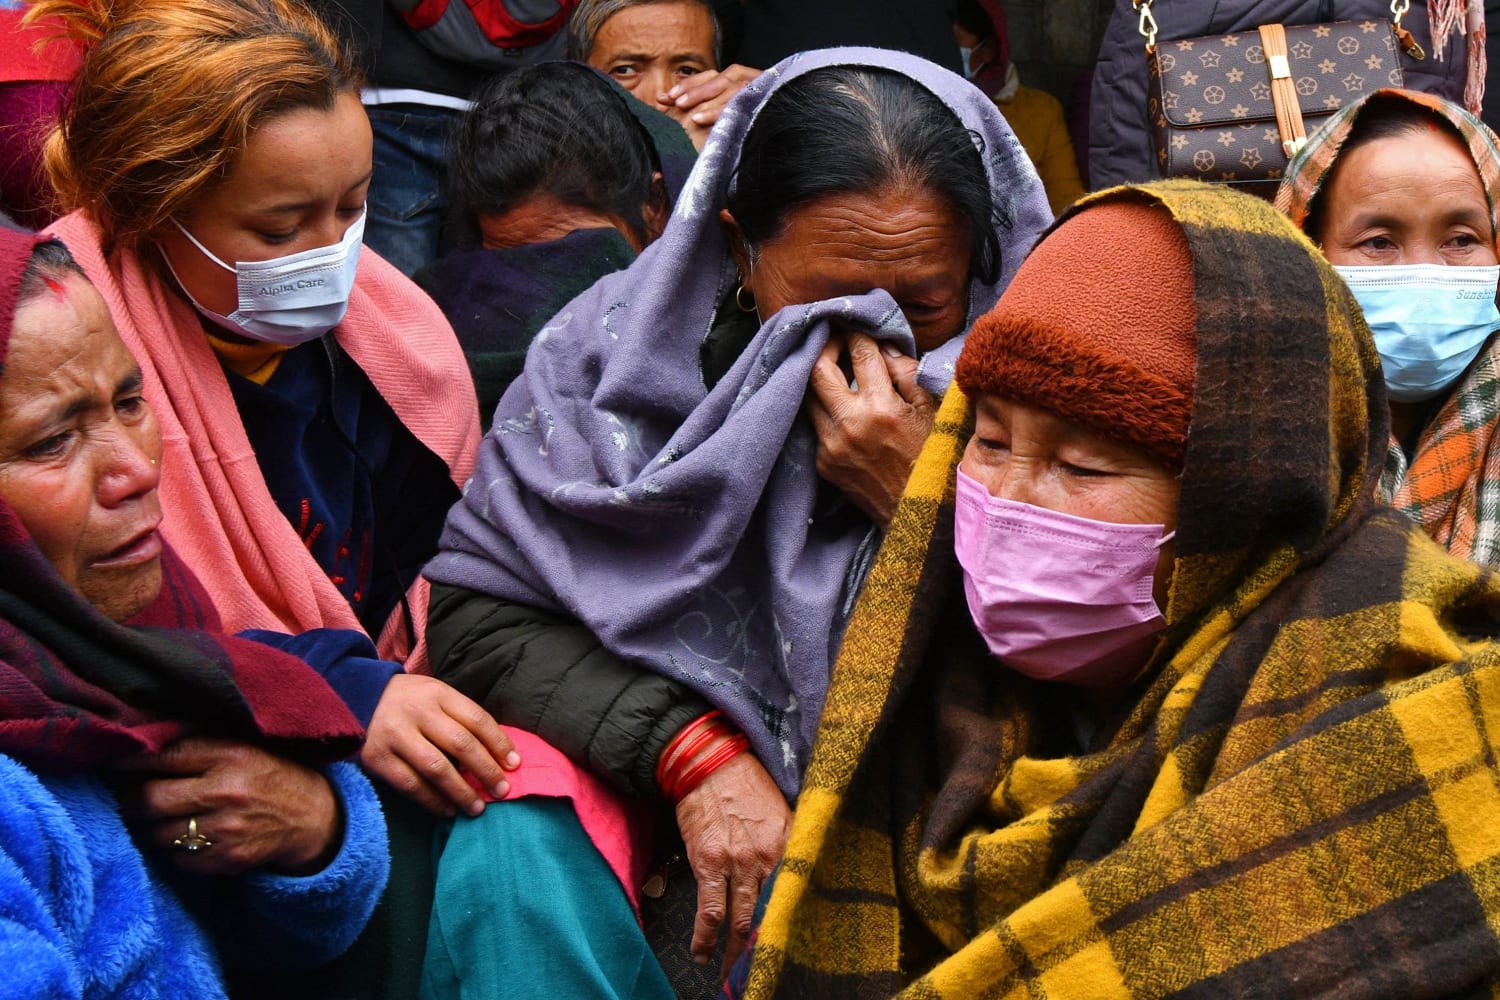 Video shows final moments before deadly Nepal plane crash